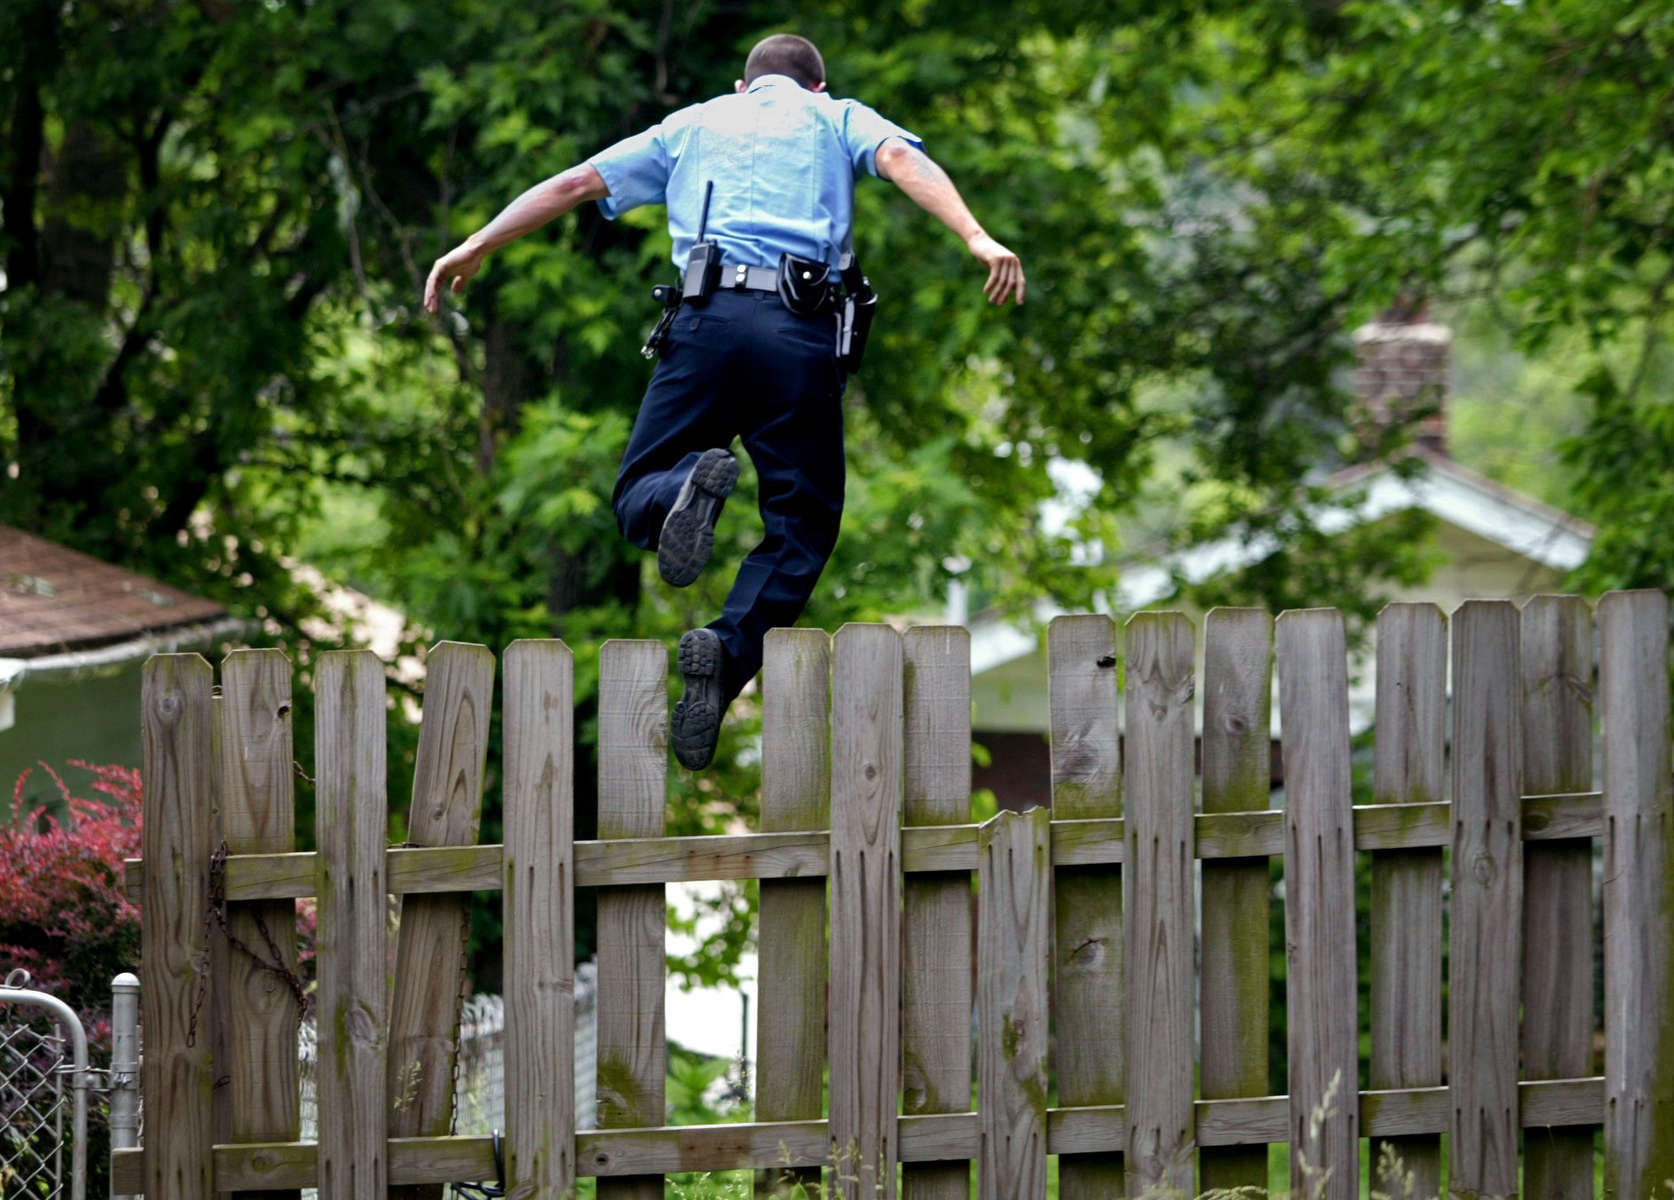 Monday June 2, 2008--Pine Lawn police officer Matthew Meinen leaps off a fence in pursuit of a suspect who fled from police that were patroling a Pine Lawn neighborhood in golf carts.  Meinen was called to scene to in his patrol car to assist when the subjects fled.David Carson | Post-Dispatch